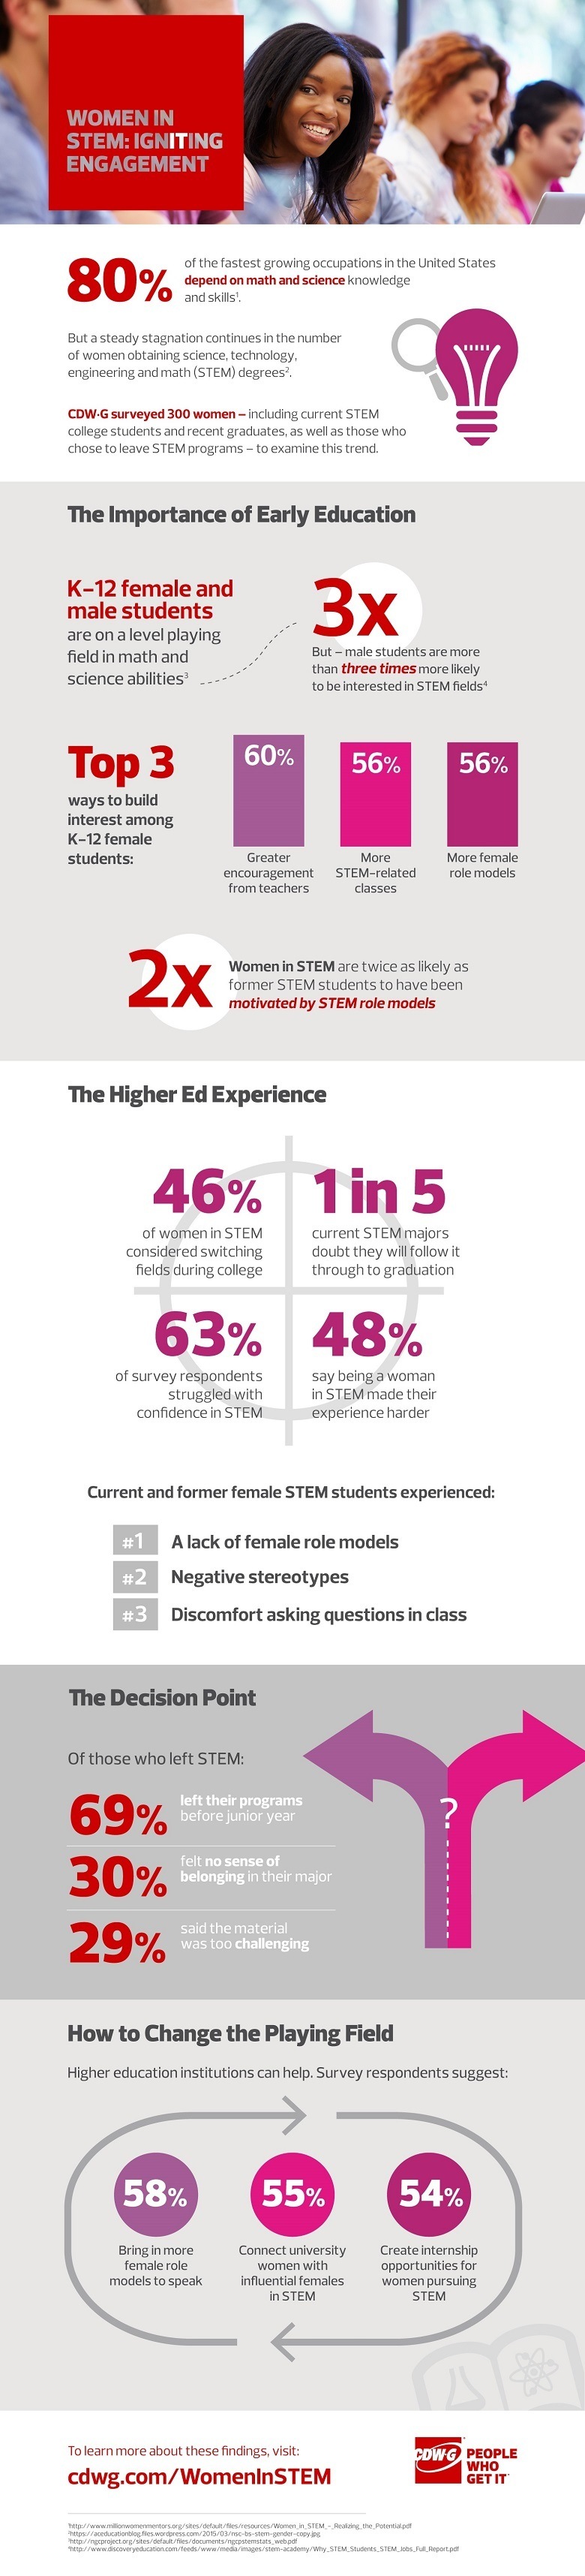 Women in STEM: Igniting Engagement Infographic